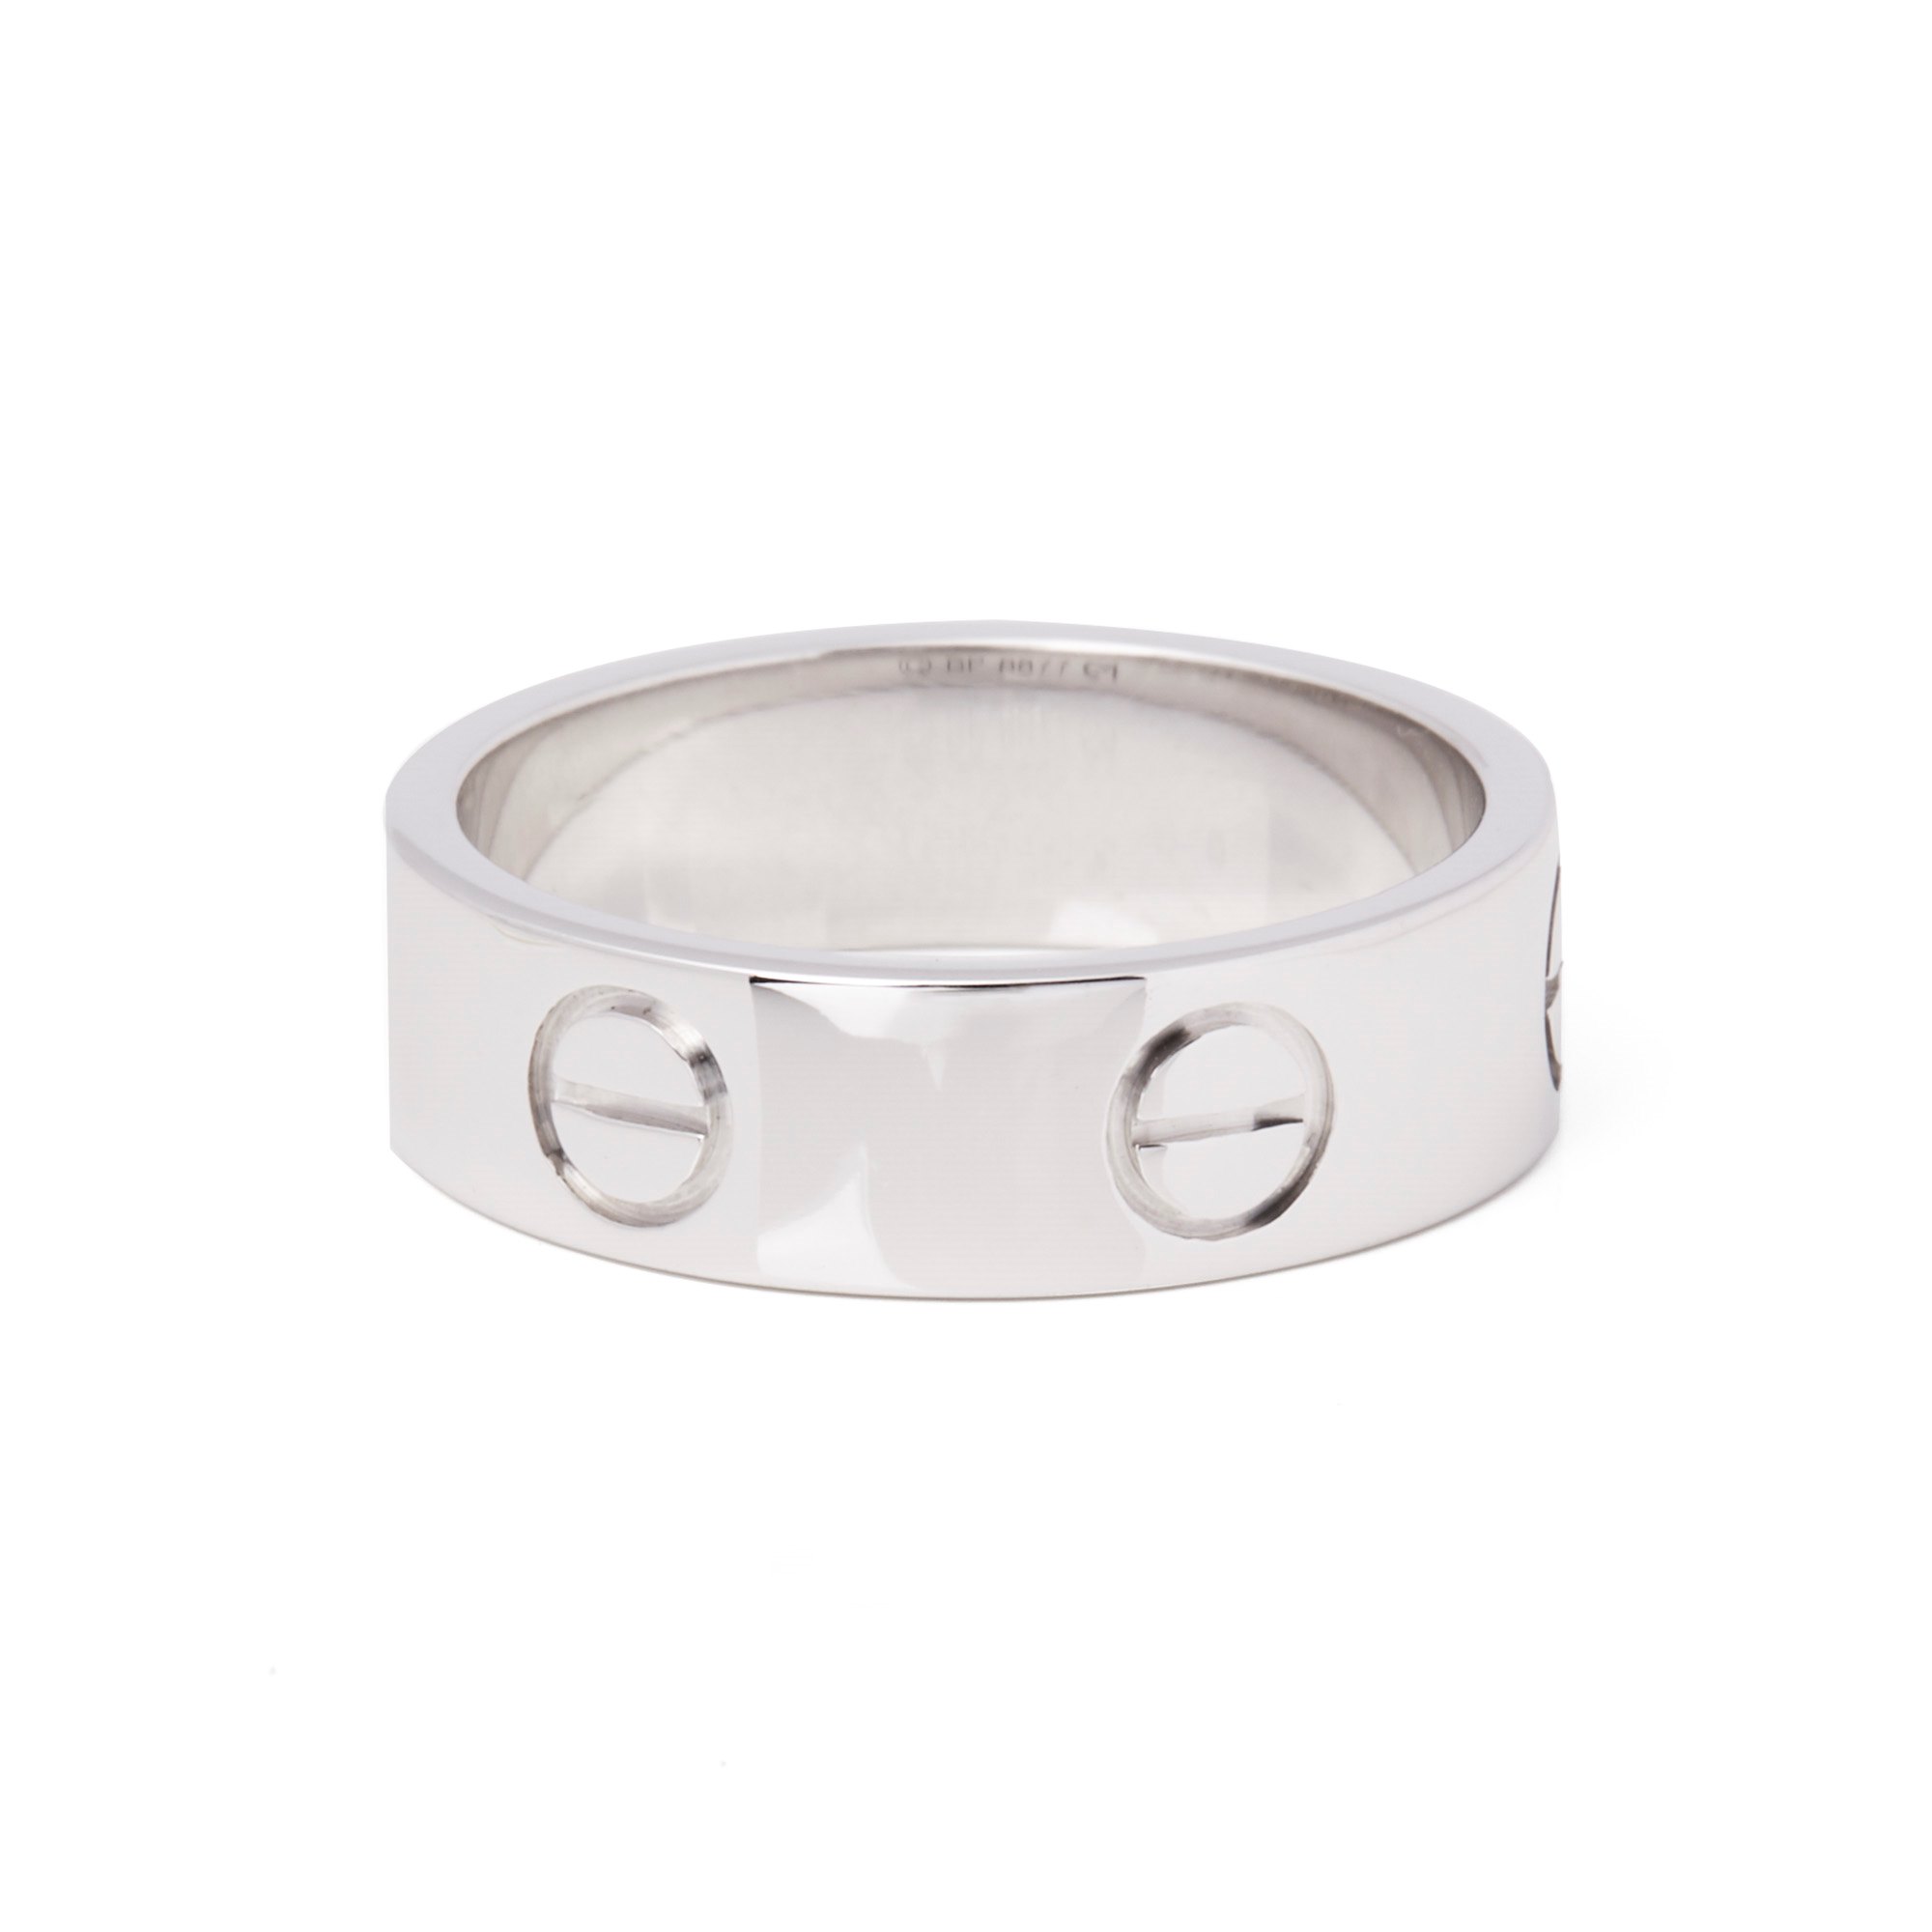 Cartier Love White Gold Band RIng